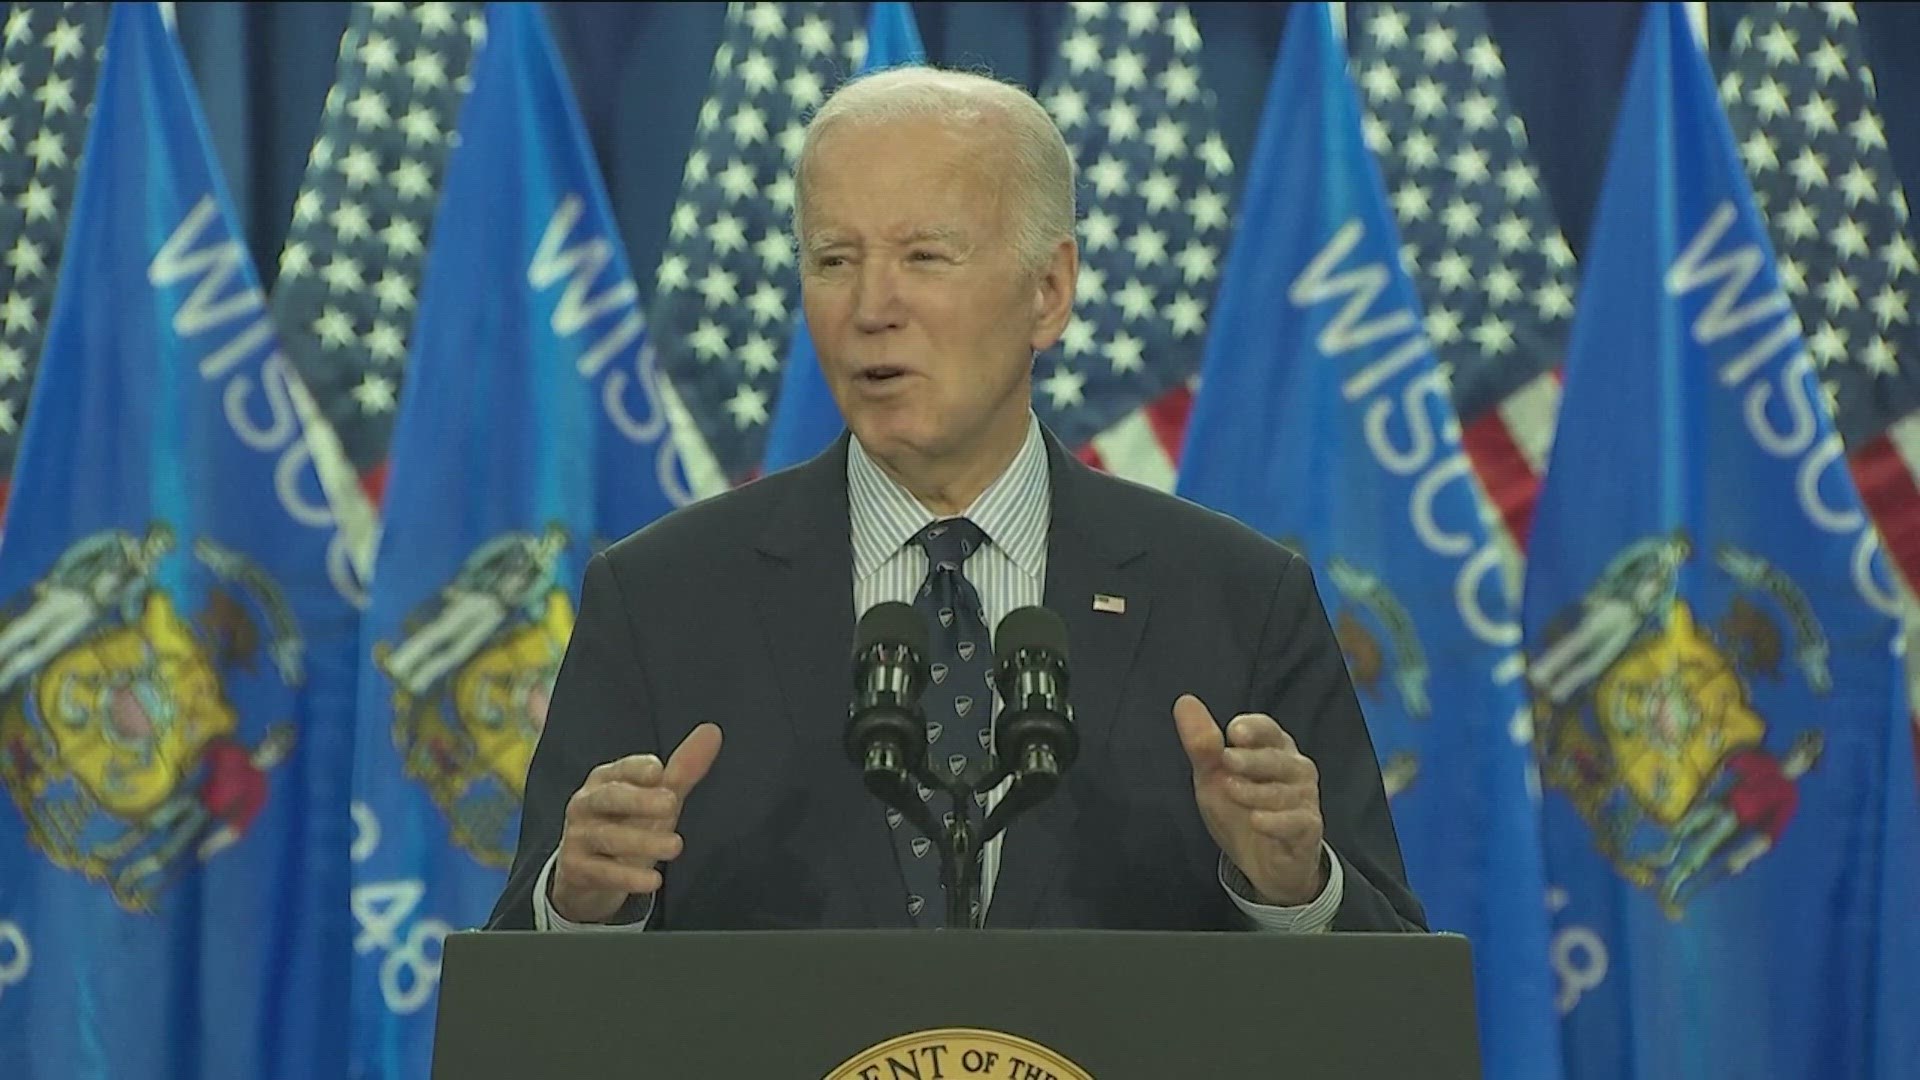 President Joe Biden has unveiled a new student loan forgiveness plan, and the White House is criticizing former President Donald Trump's latest comments on abortion.